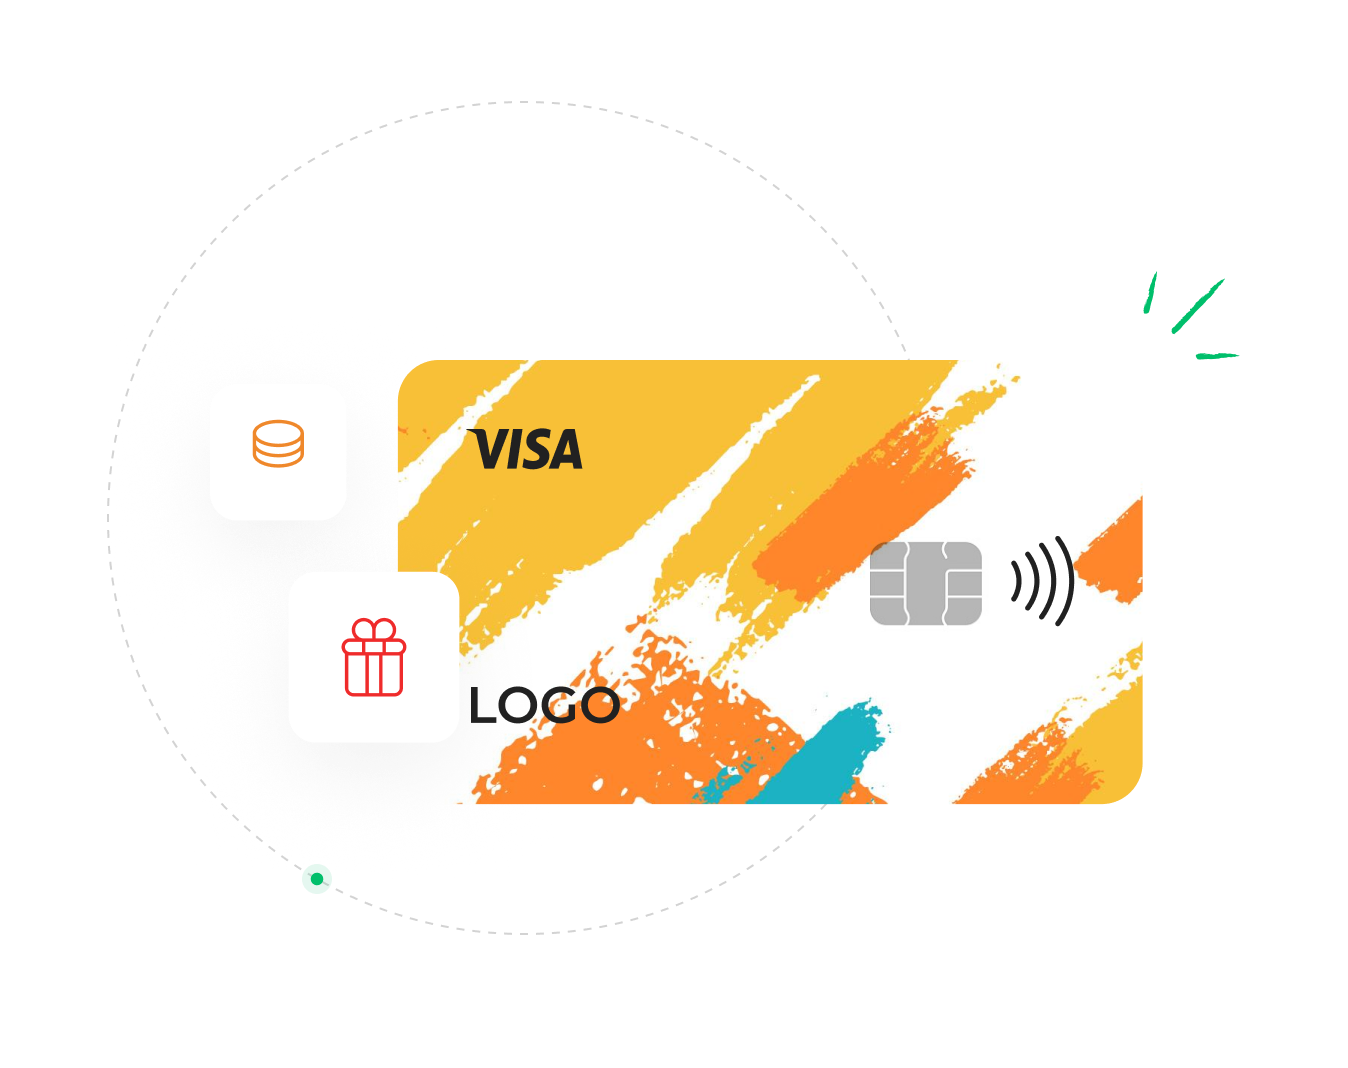 One white-label debit card: a world of possibilities